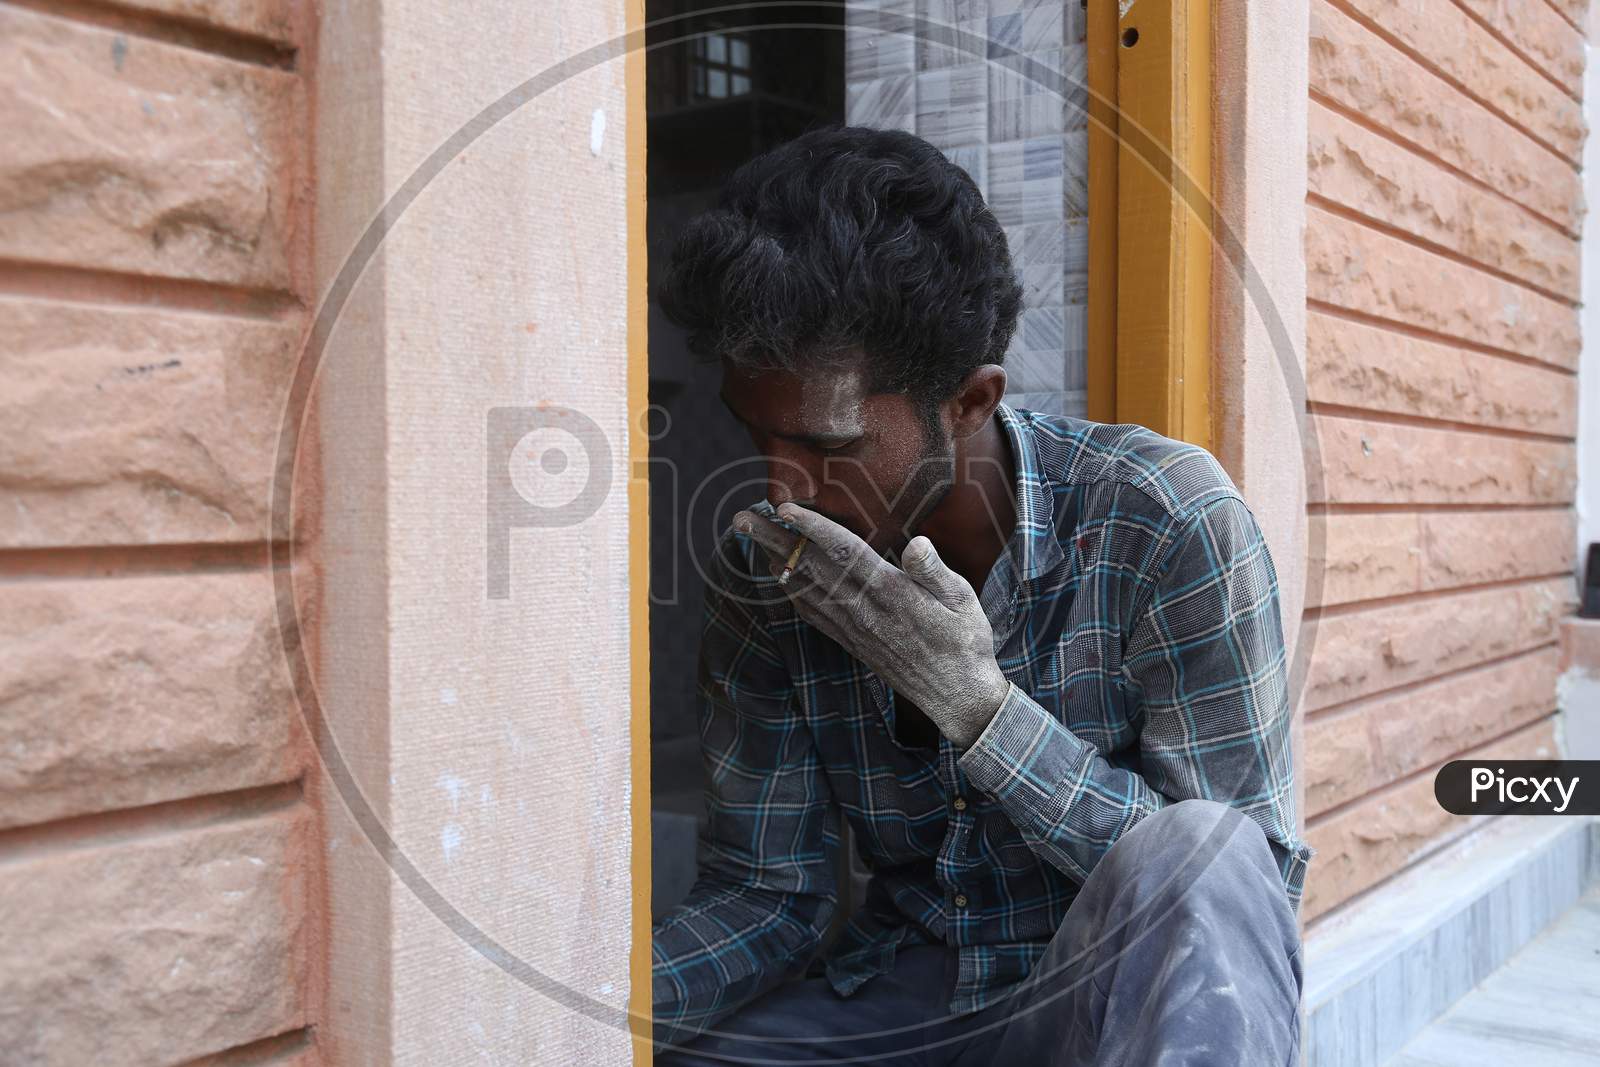 Jodhpur, Rajasthan, India, 20Th September 2020: Poor Young Indian Labour Worker Smoking Cigarette Break In The Workload, Man Working On Construction Site.